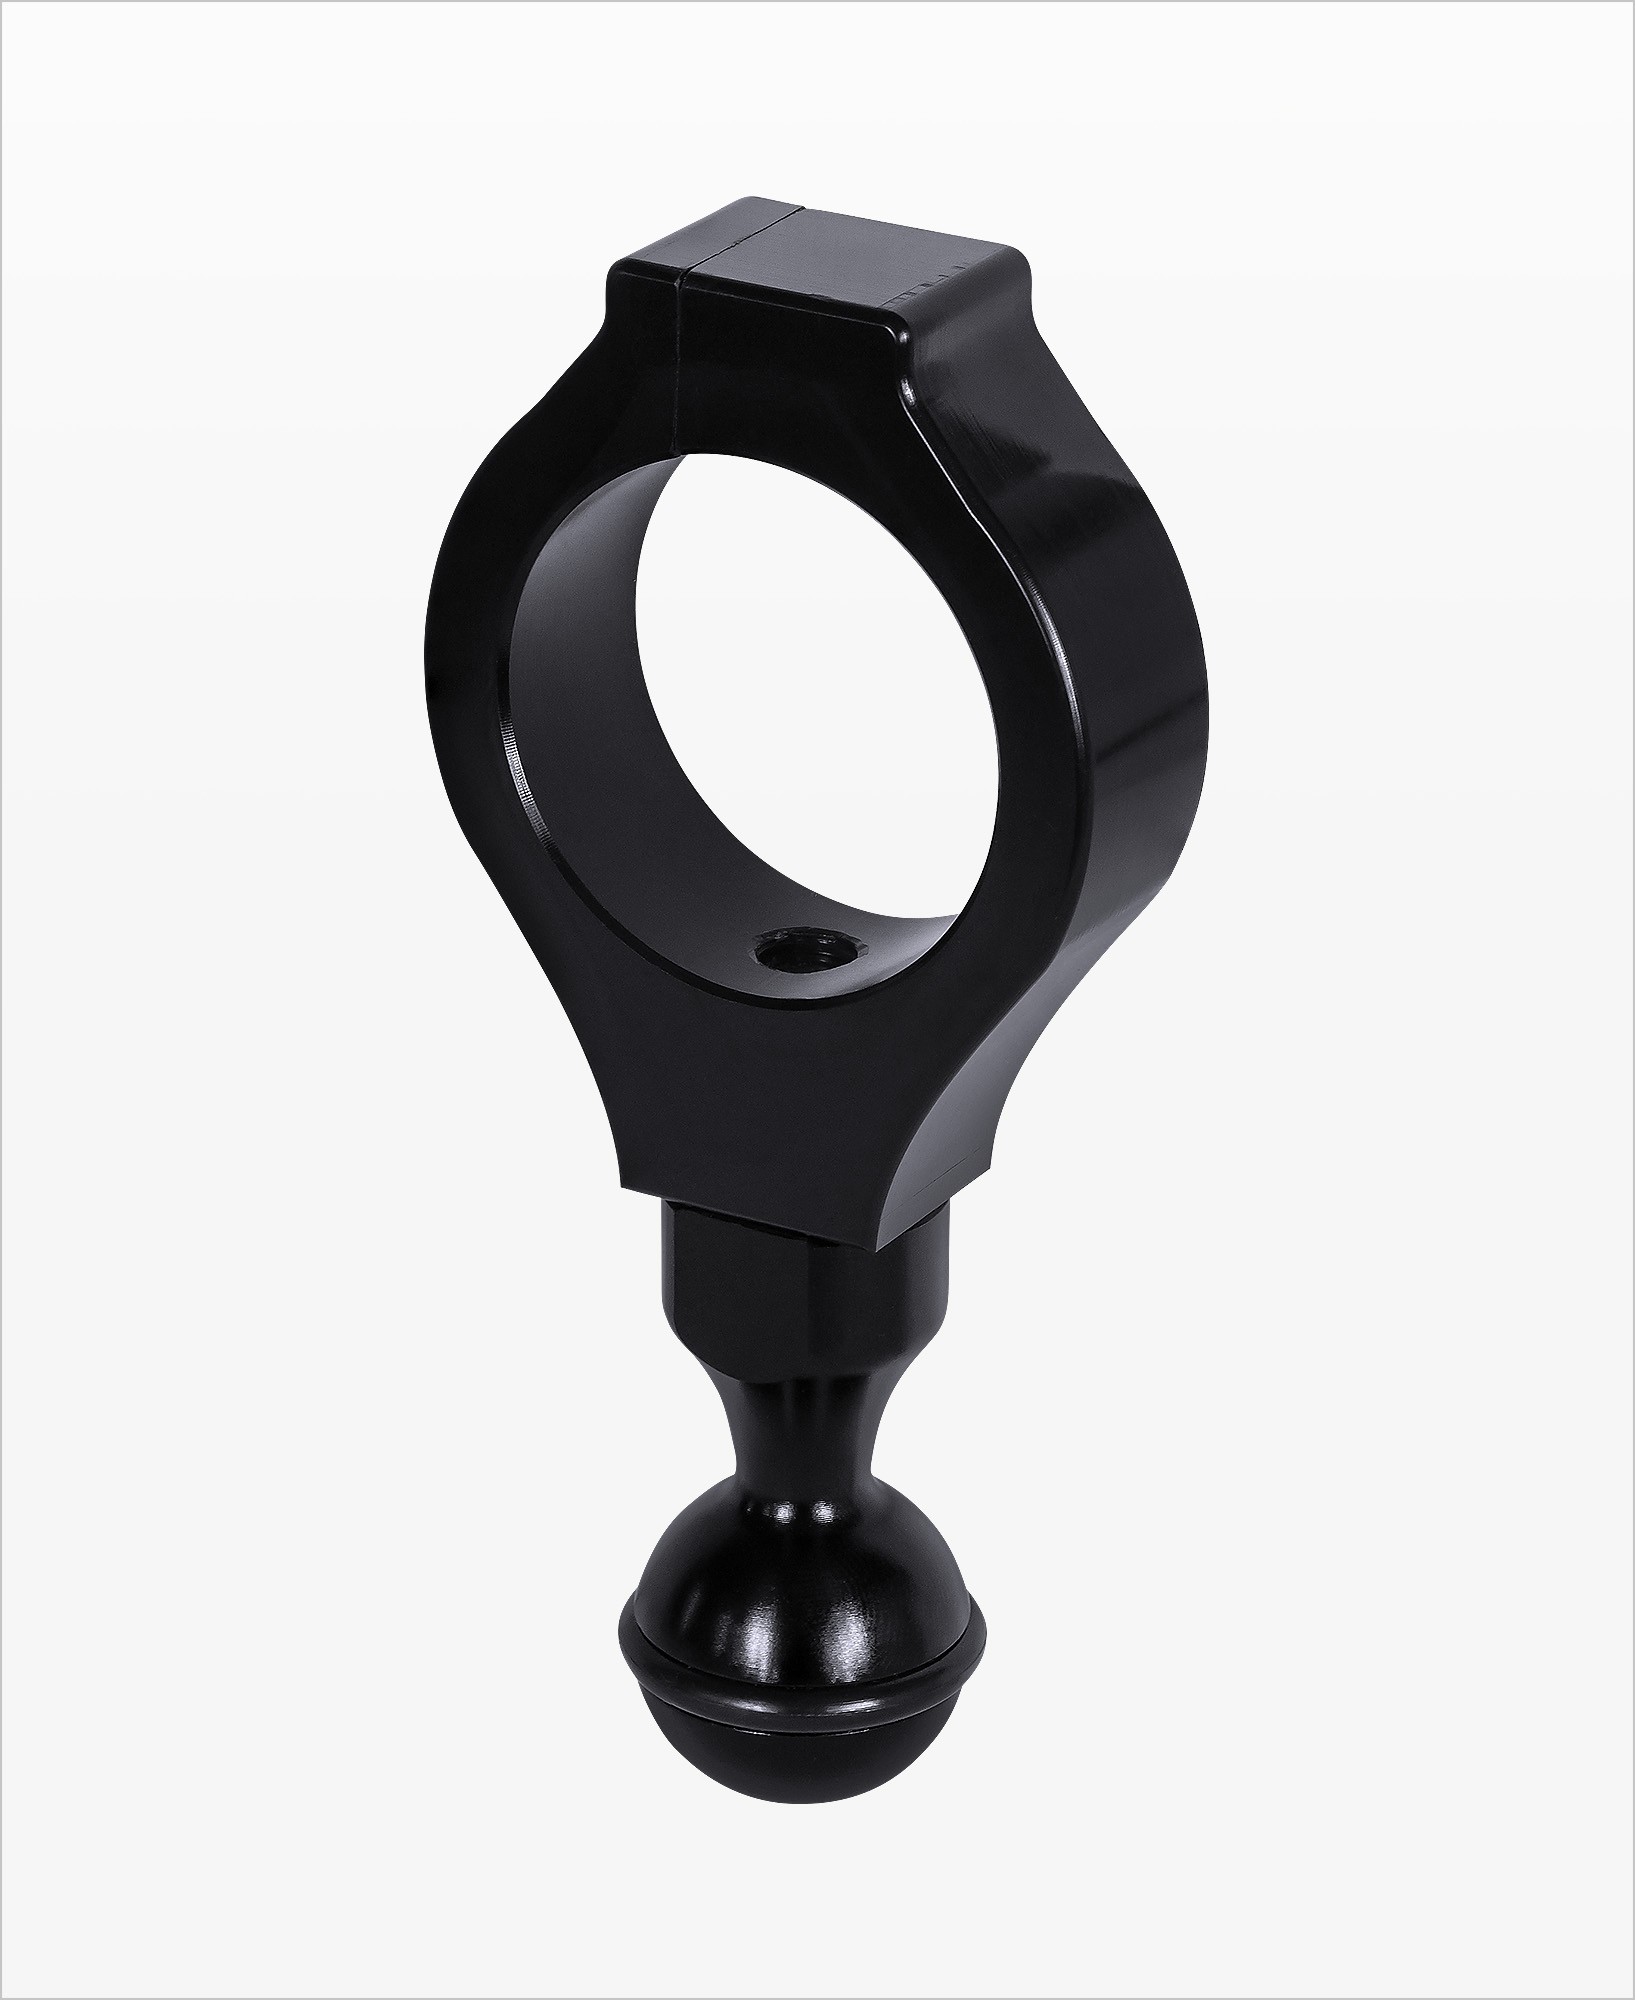 Details about   Scuba Underwater Photo/Video Light Torch Clamps Bracket Stand Mount Arms System 